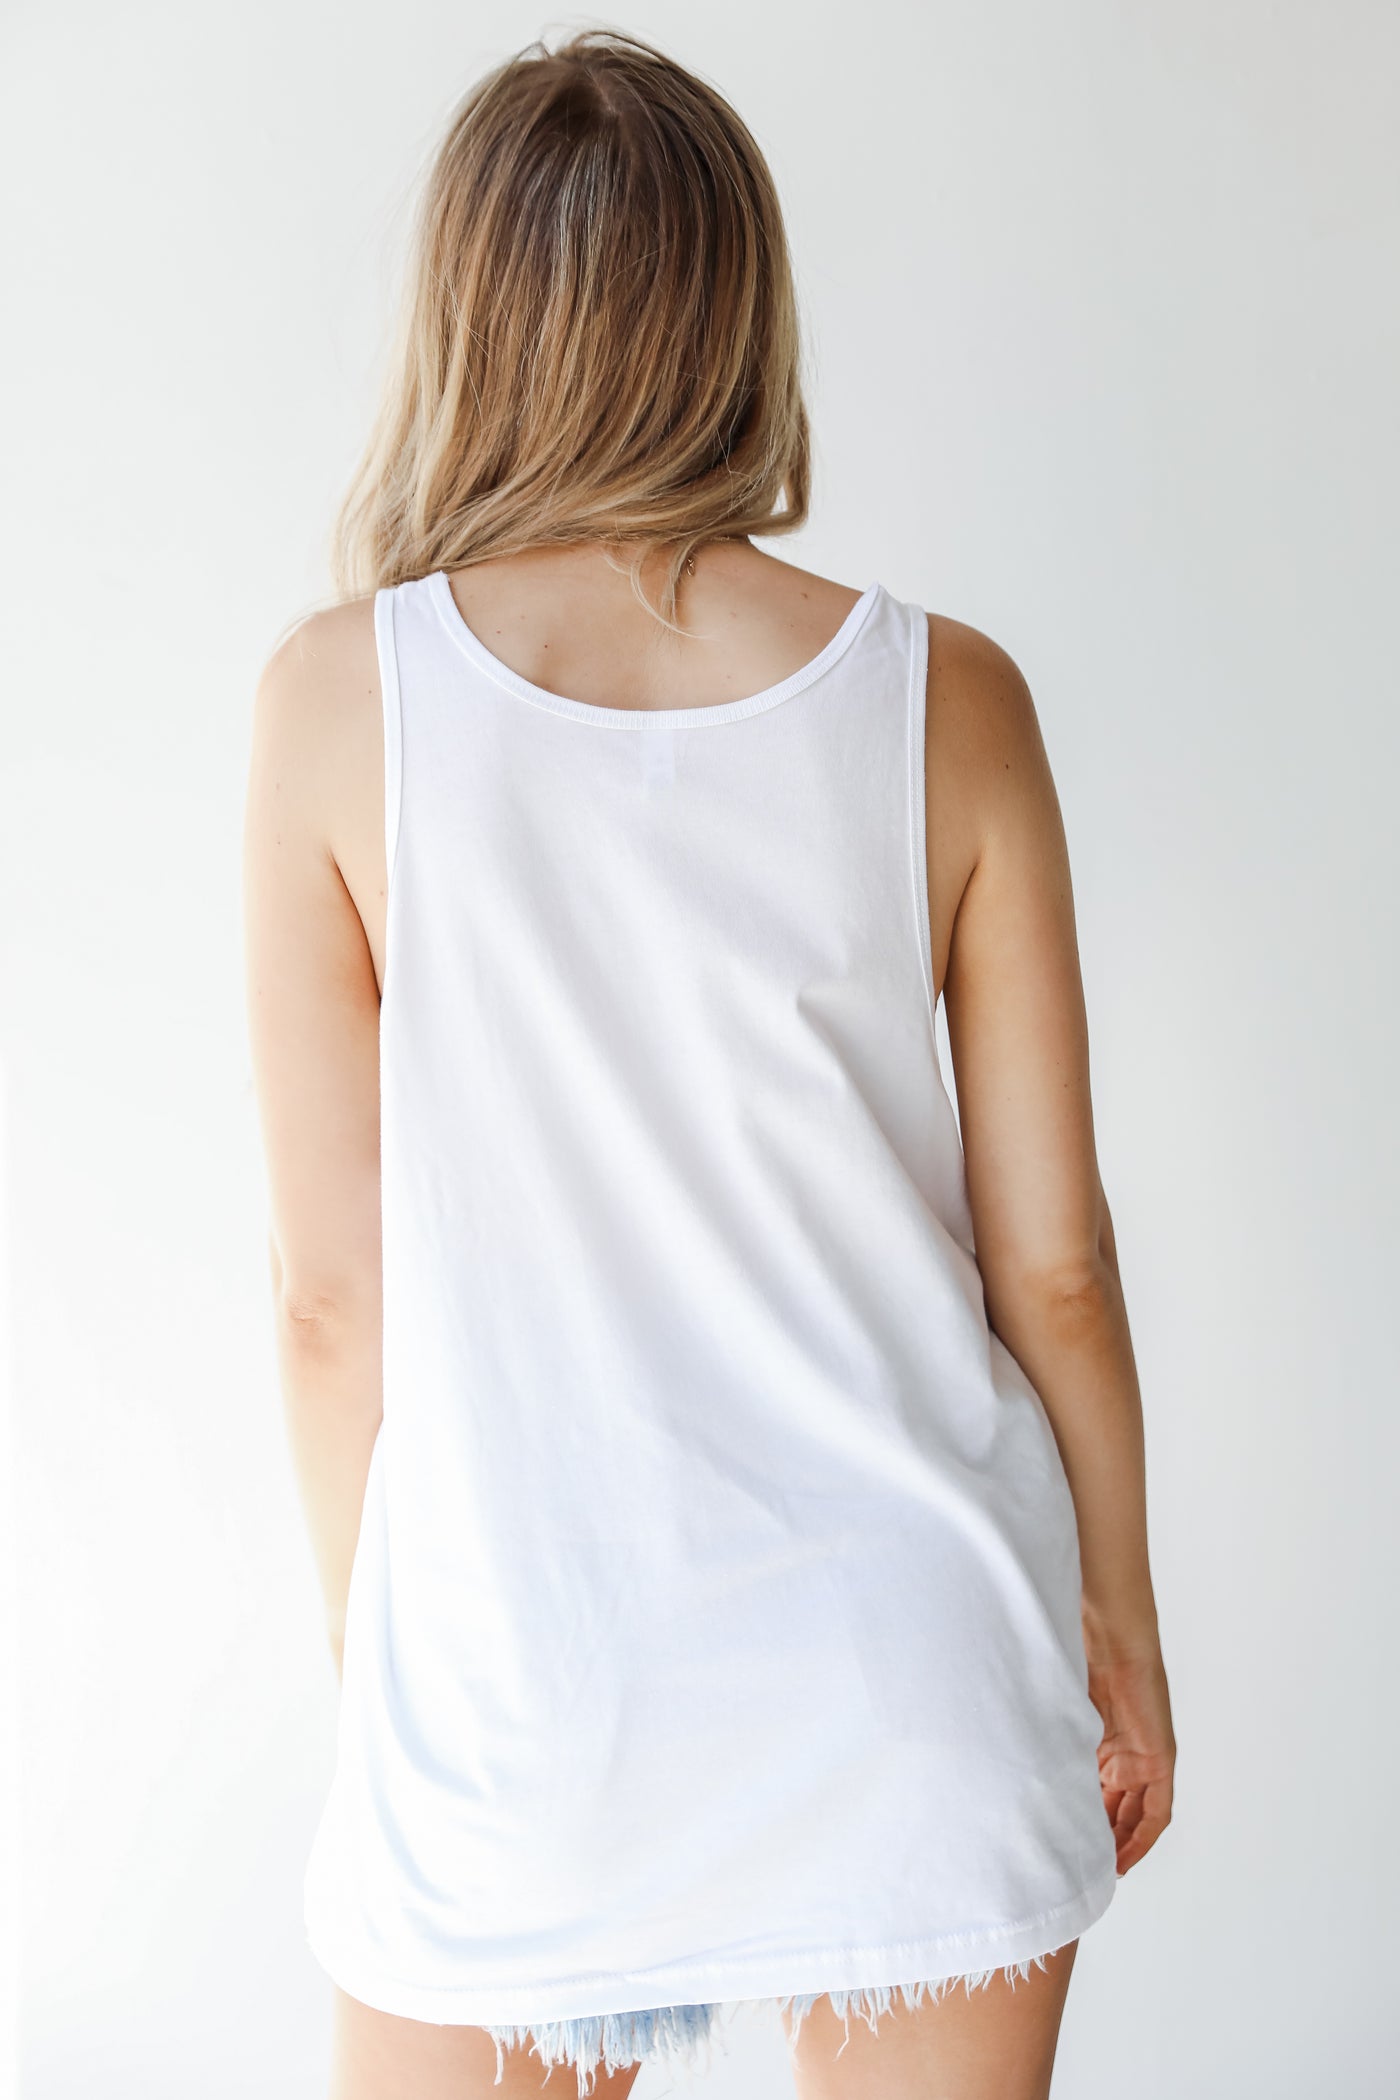 Chop Chop Graphic Tank in white back view